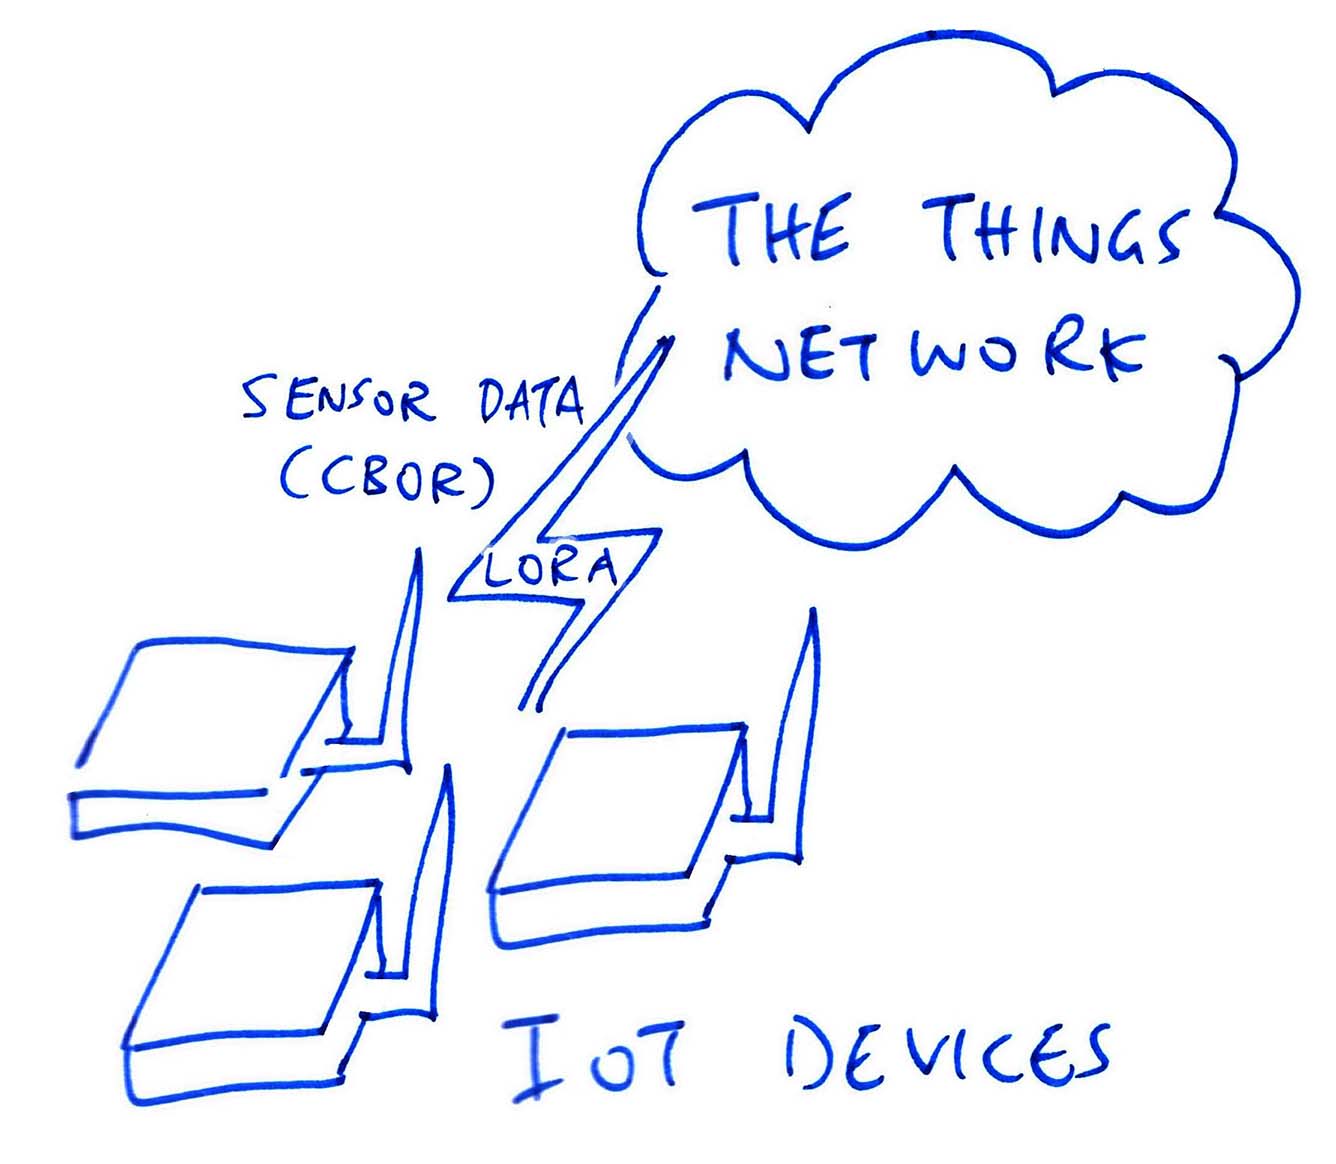 IoT Devices transmitting Sensor Data to The Things Network